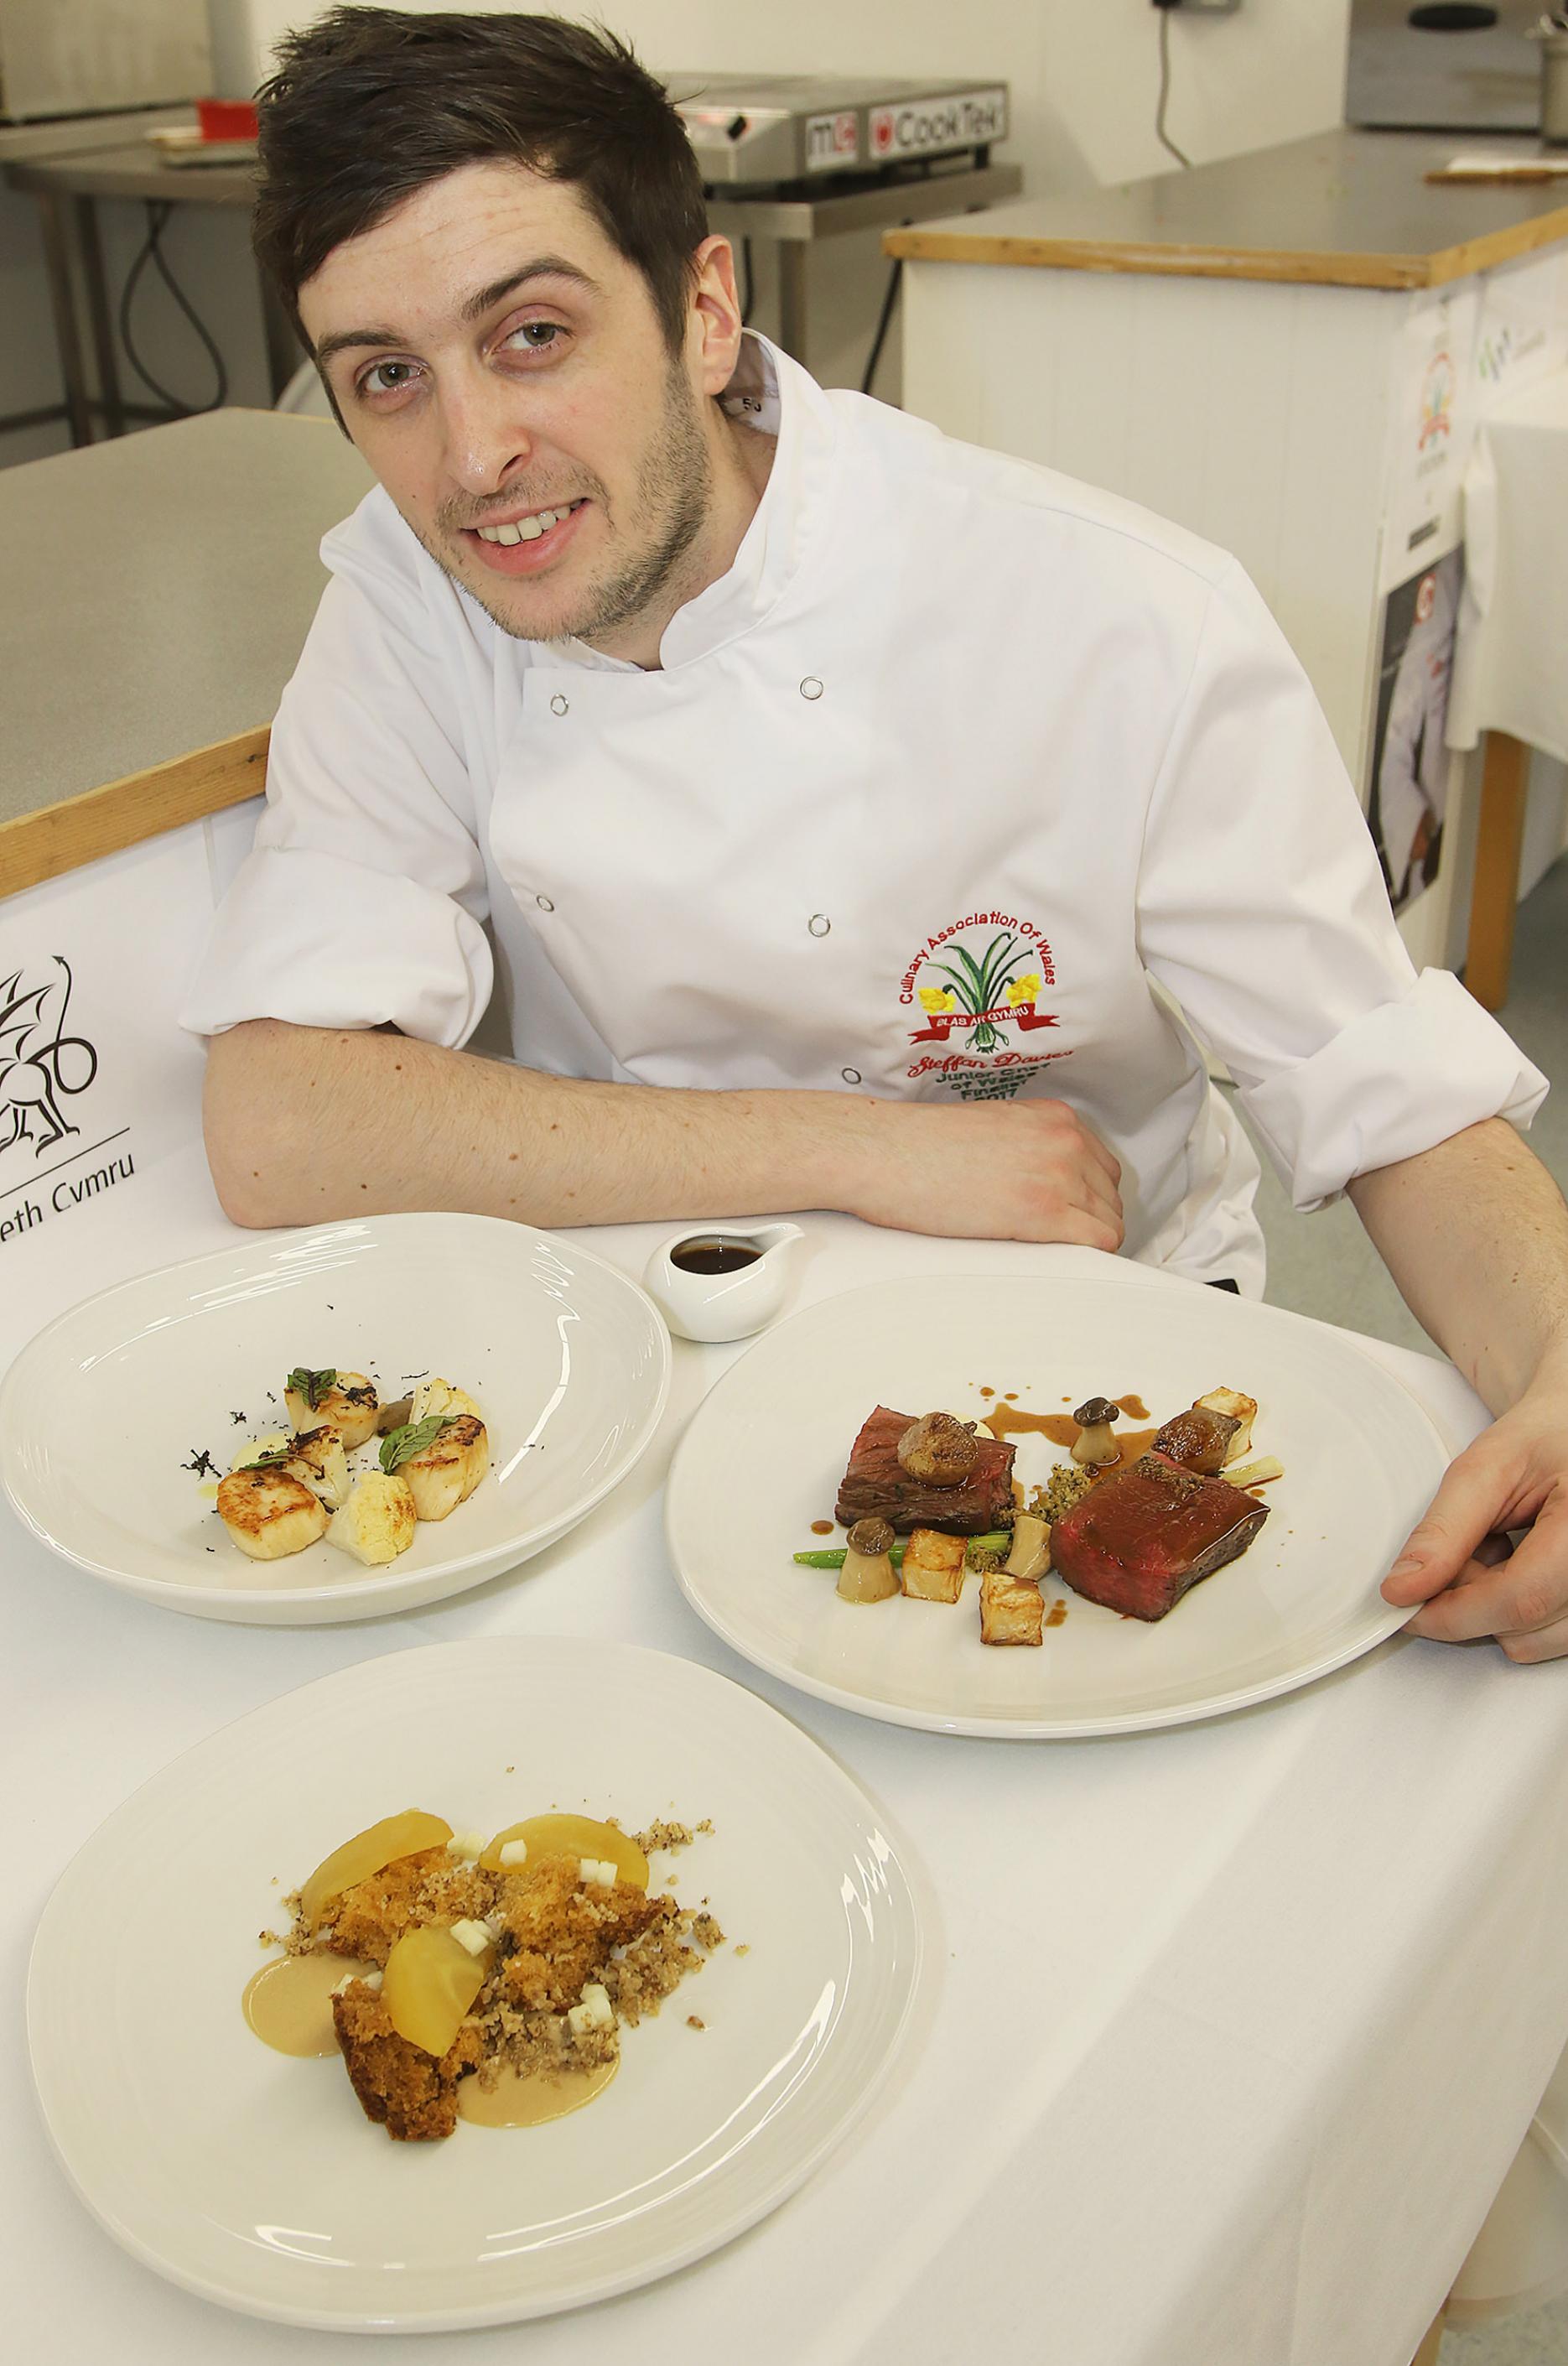 Culinary Association of Wales crowns Junior Chef of Wales